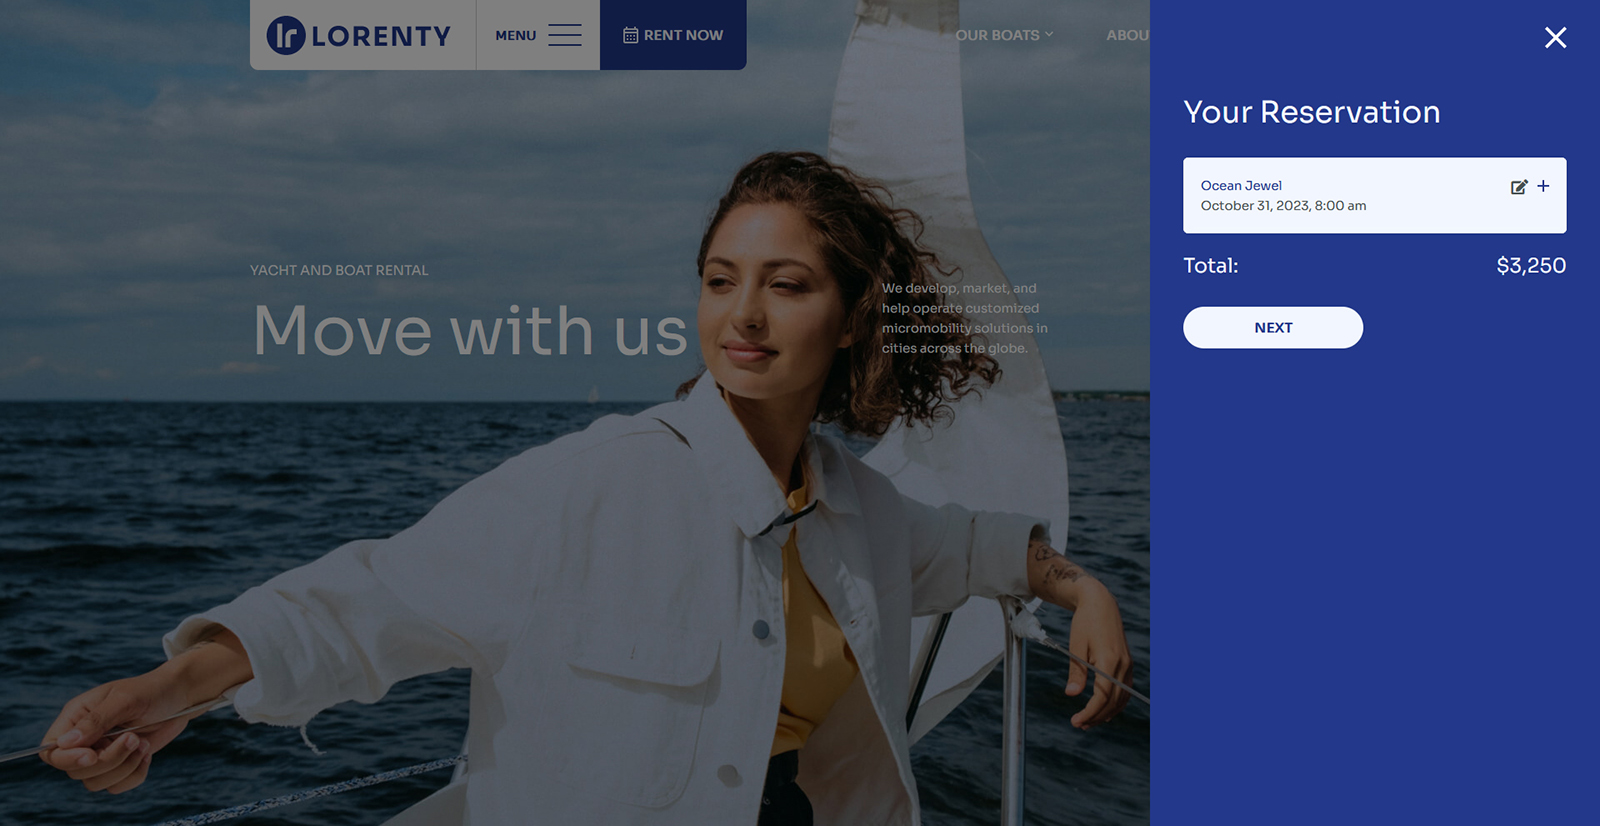 Rendering of the boat charter booking functionality featured in the Lorenty WordPress theme for those learning how to start a boat charter business.